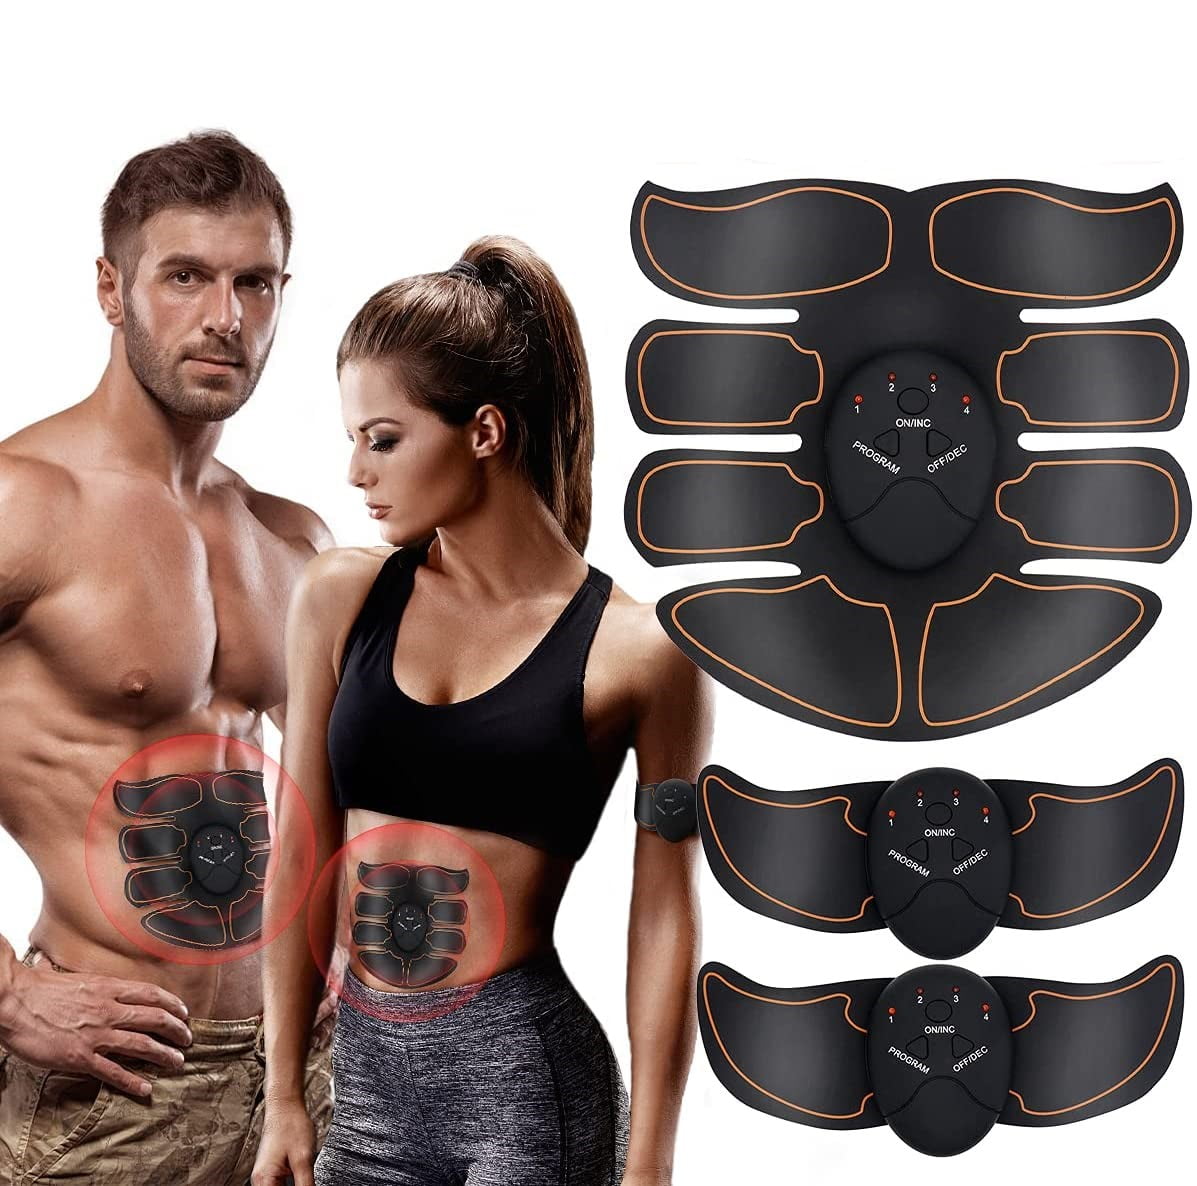 AILSWORTH Electronic Muscle Stimulator - Ab Machine, ABS Abdominal Toning  Belt for Men and Women, Toner Training Device Sports Fitness AB Workout